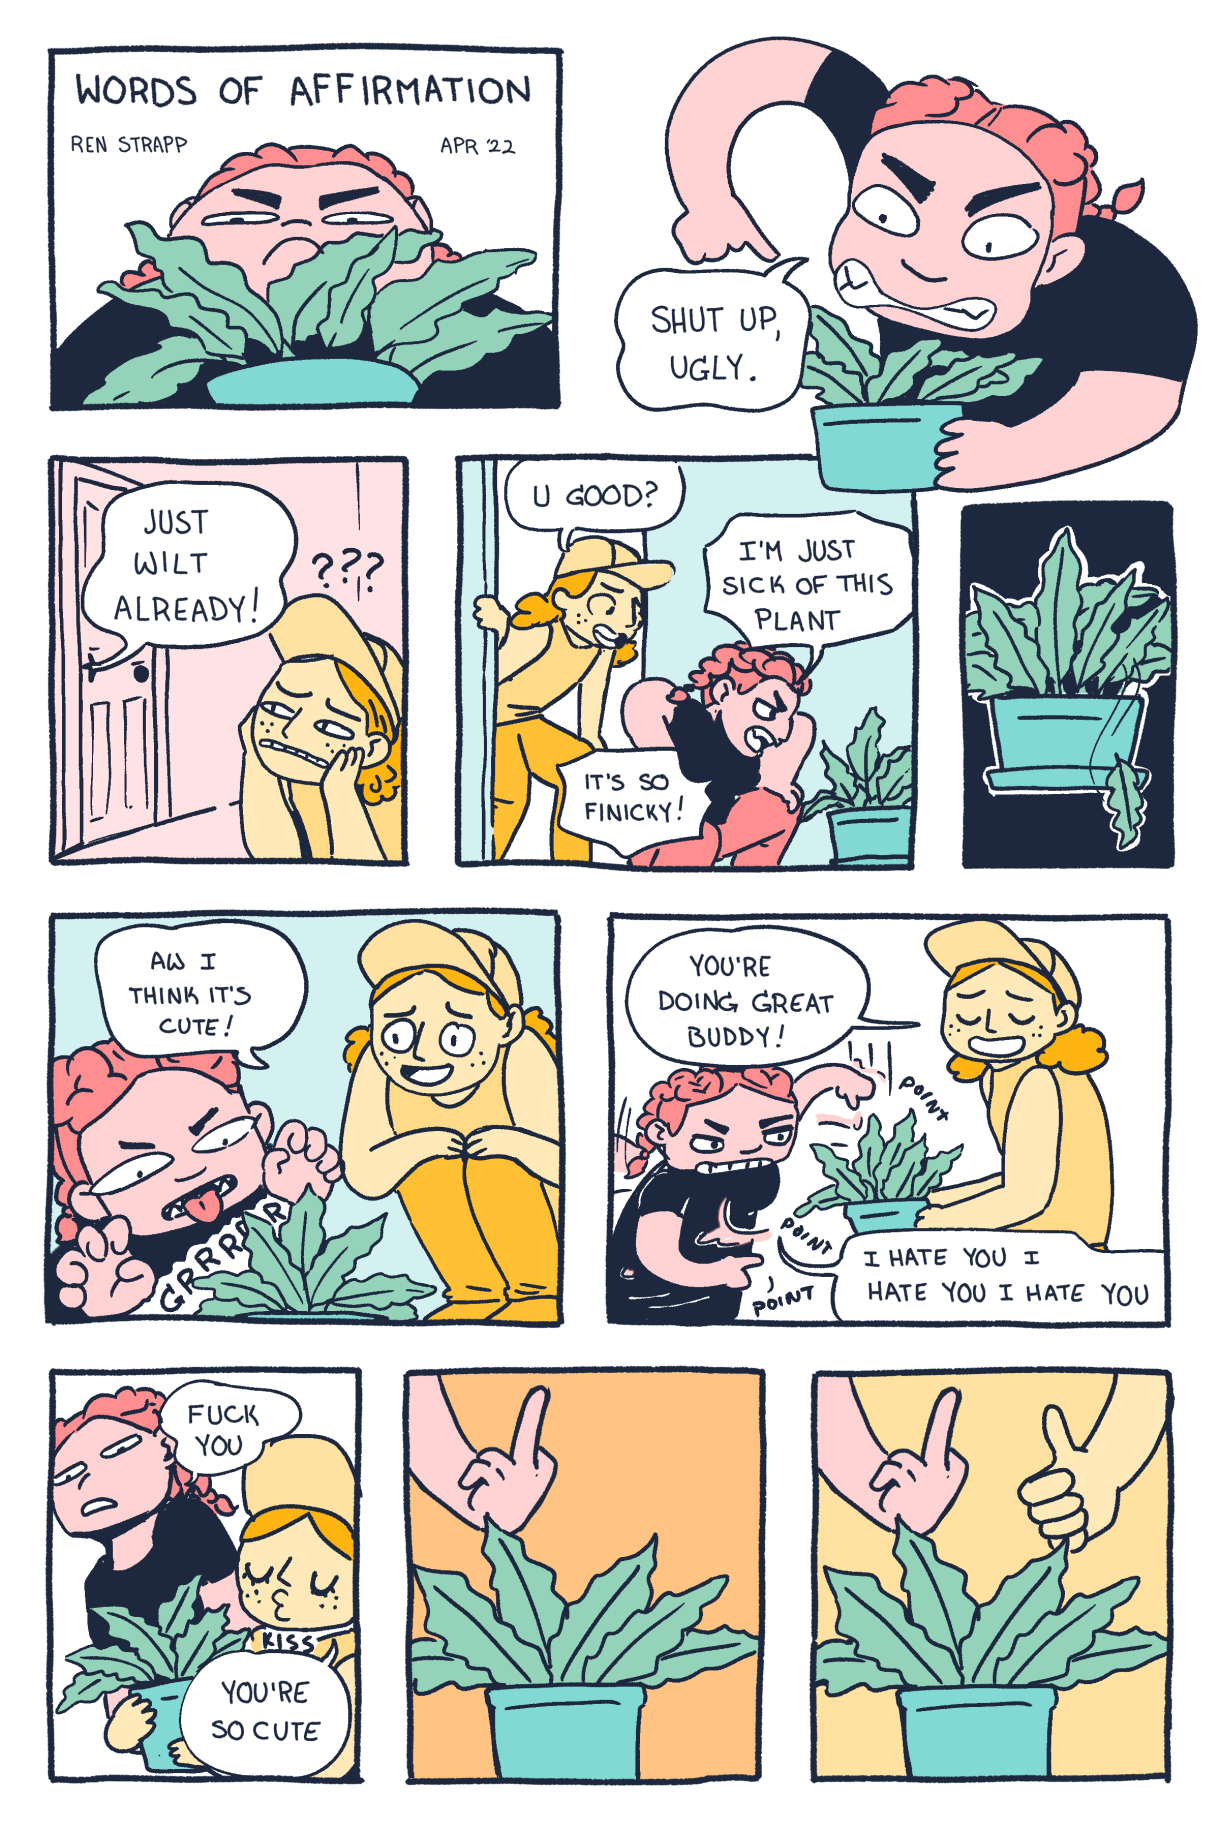 In a ten panel comic in colors of pastel pink, mint green, and goldenrod — one queer says mean things to a plant and makes mean faces, “Shut up ugly! Wilt already! Grrrr! I hate you! I hate you!” Another queer talks kind to the plant, “Aw I think it’s cute! You’re doing great buddy!” Then the angry queer gives the plan 6th middle finger, and the other queer gives the same plant a thumbs up.